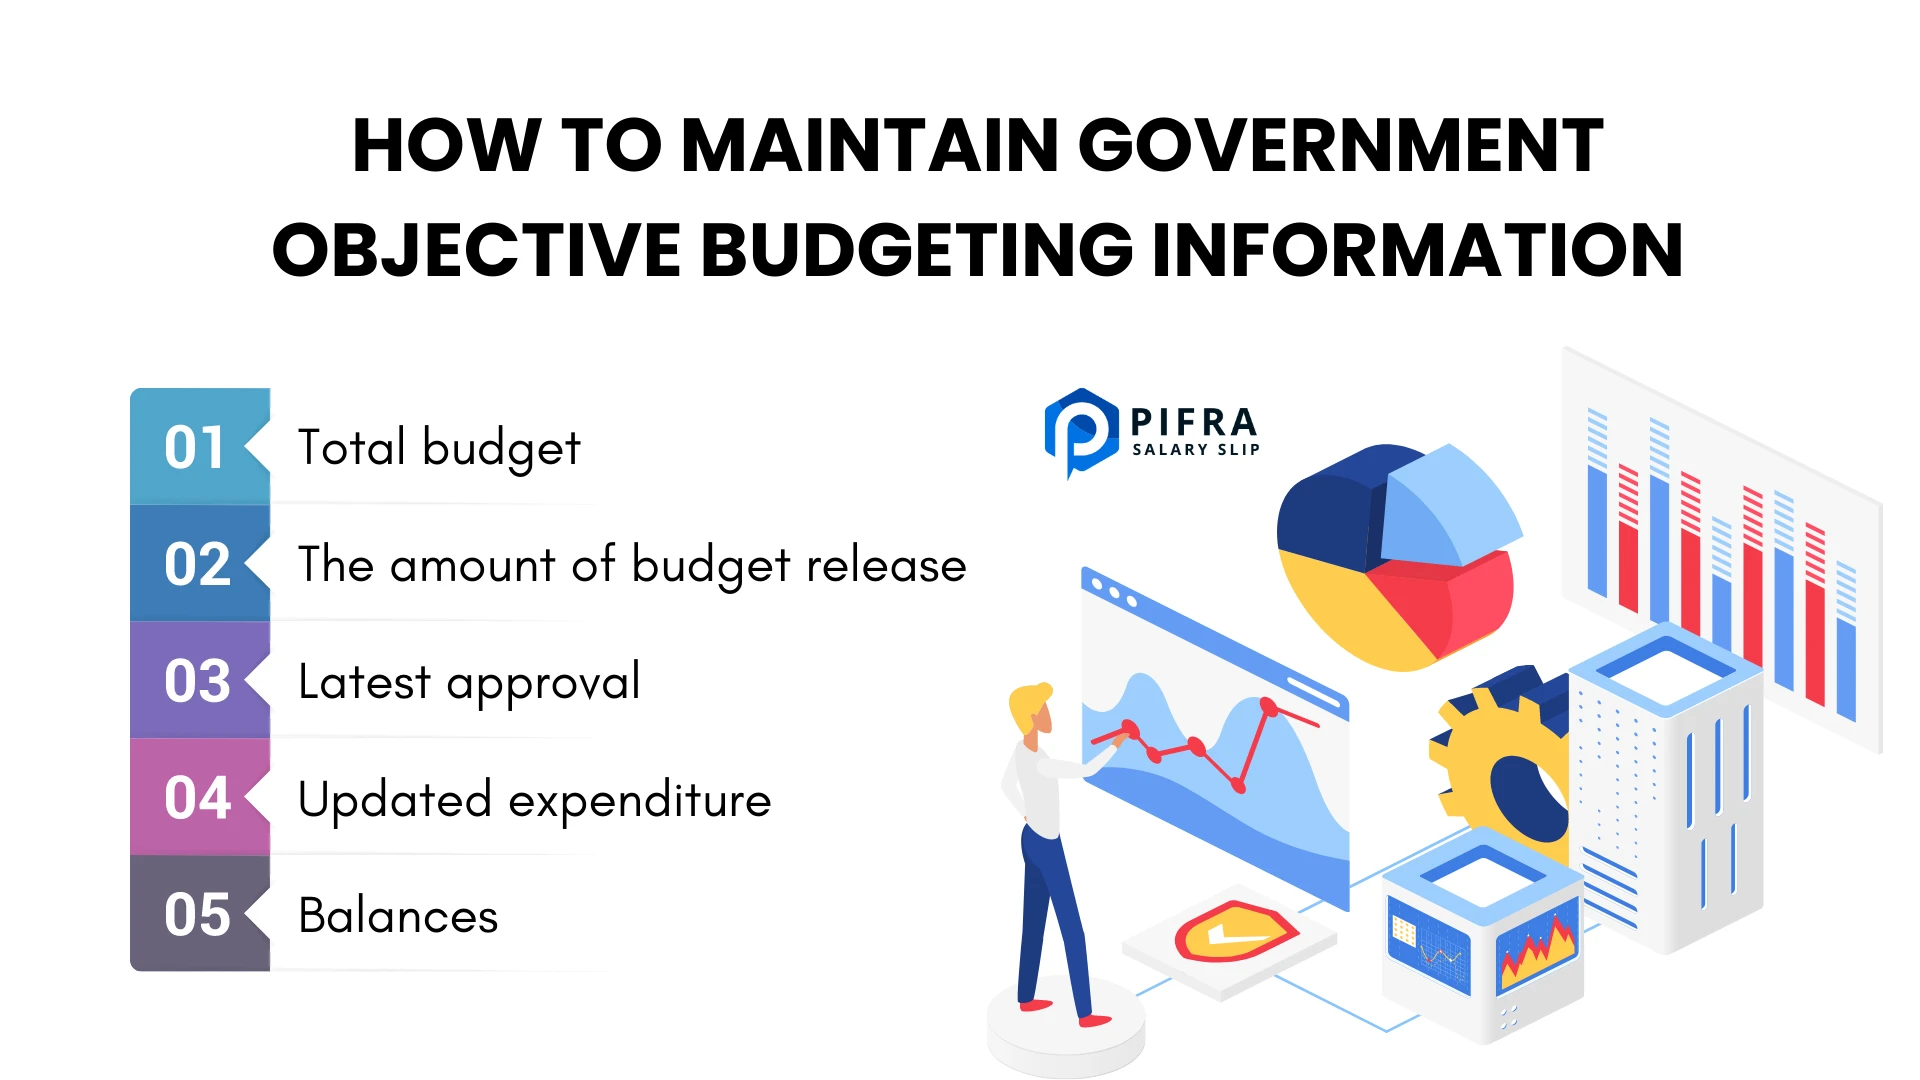 How to maintain government objective budgeting information